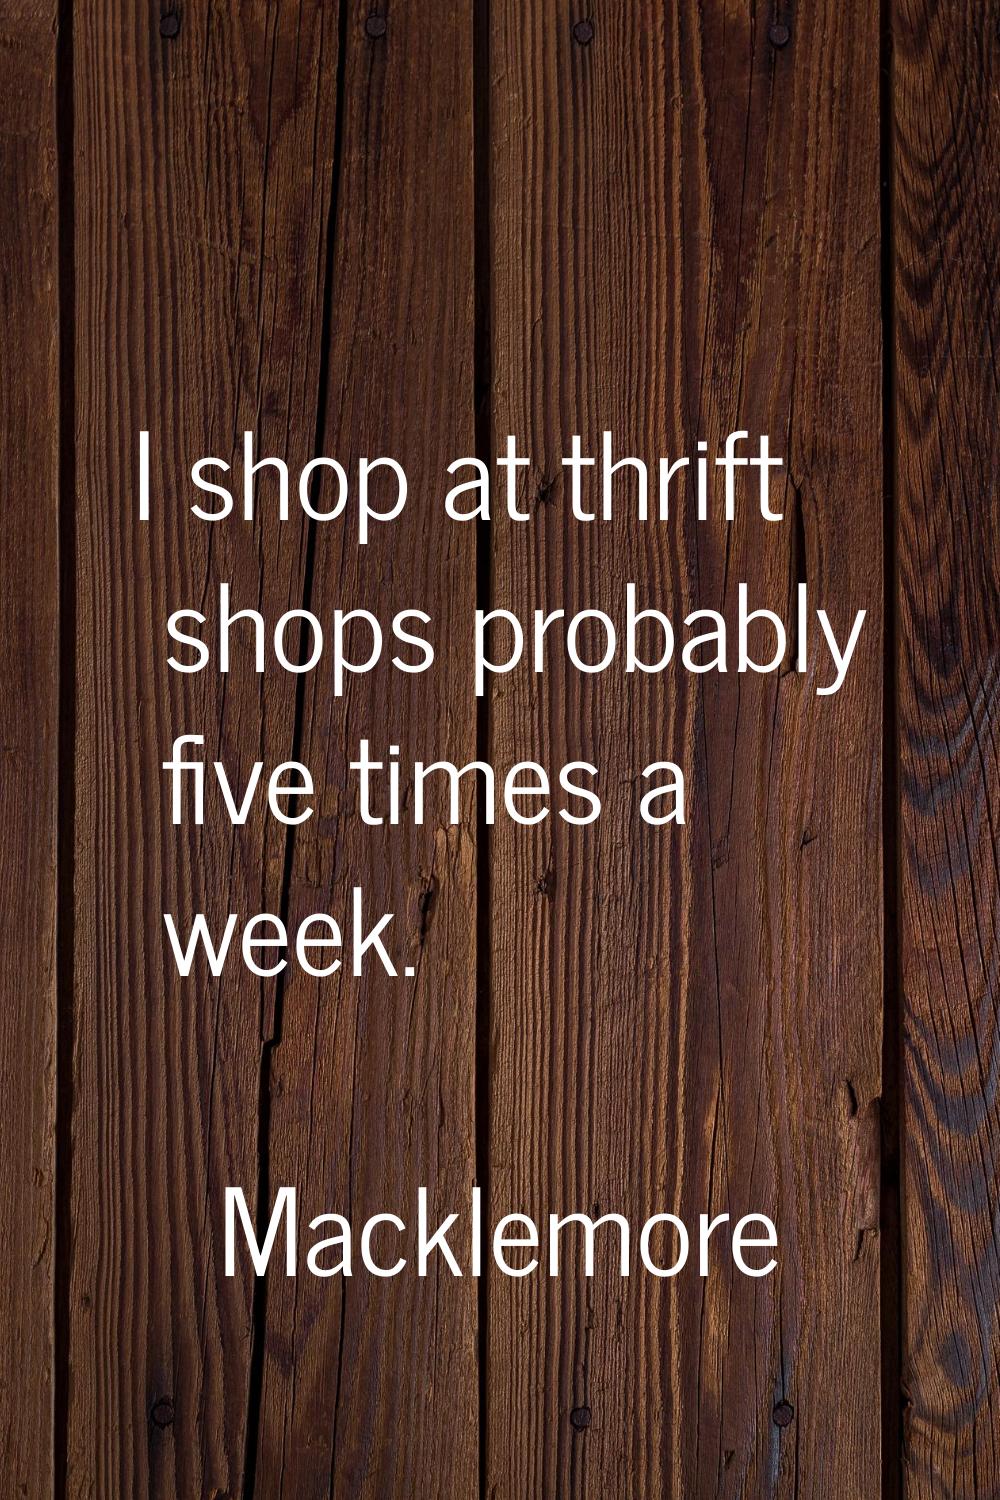 I shop at thrift shops probably five times a week.